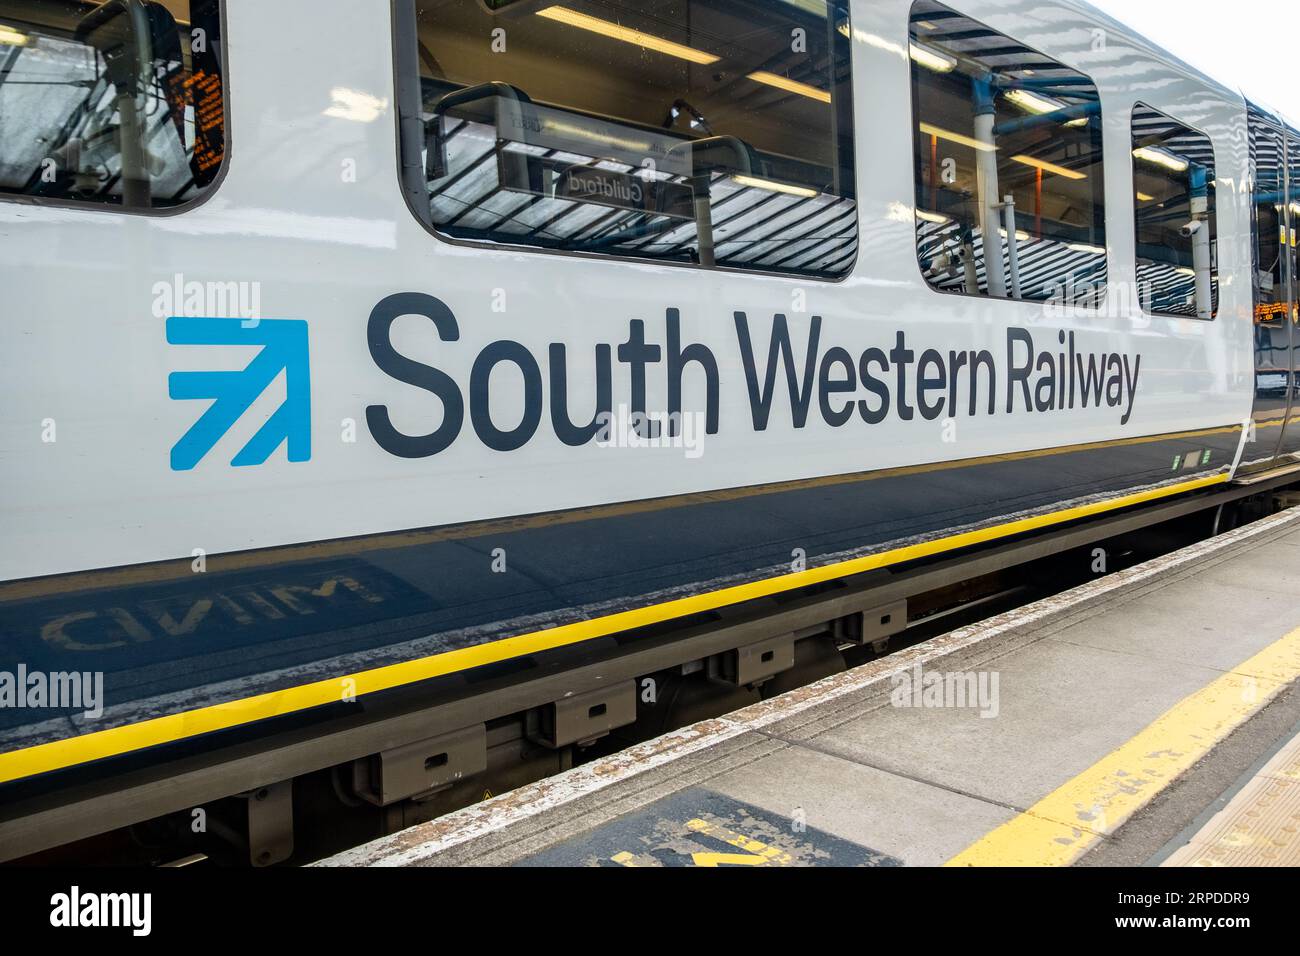 GUILDFORD, SURREY, UK- AUGUST 31, 2023: South Western Railway train on platform at Guildford Station- Surrey train station on the Portsmouth Direct Li Stock Photo